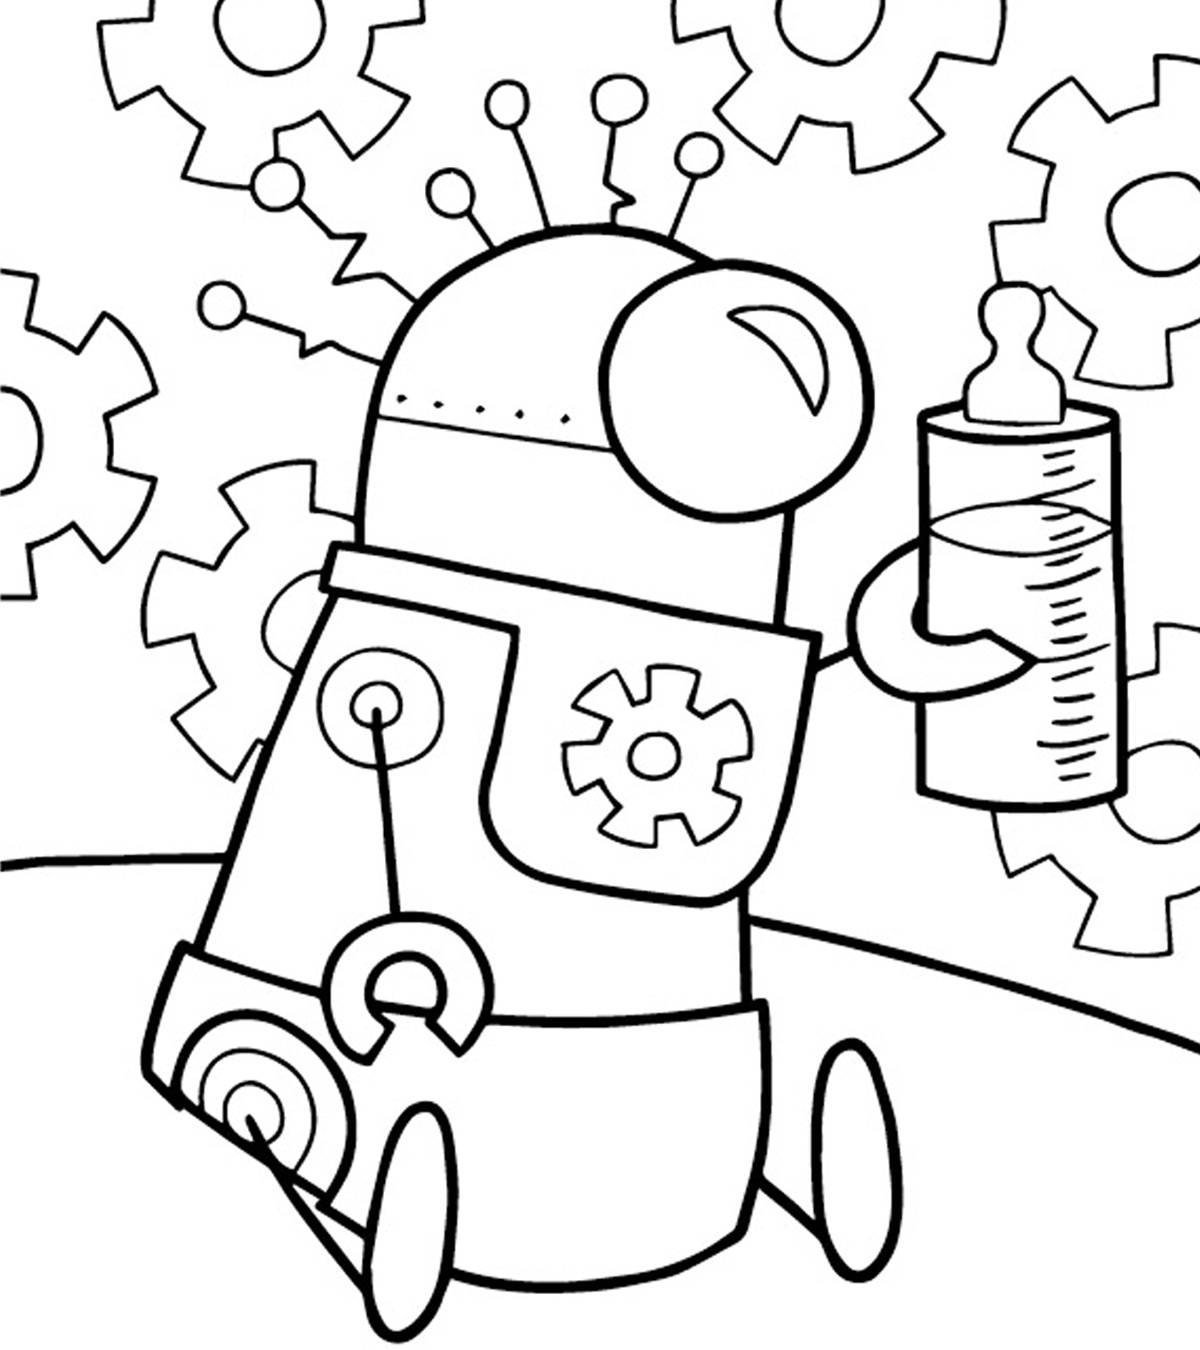 20 Cute Free Printable Robot Coloring Pages Online - coloring pages roblox free download best coloring pages